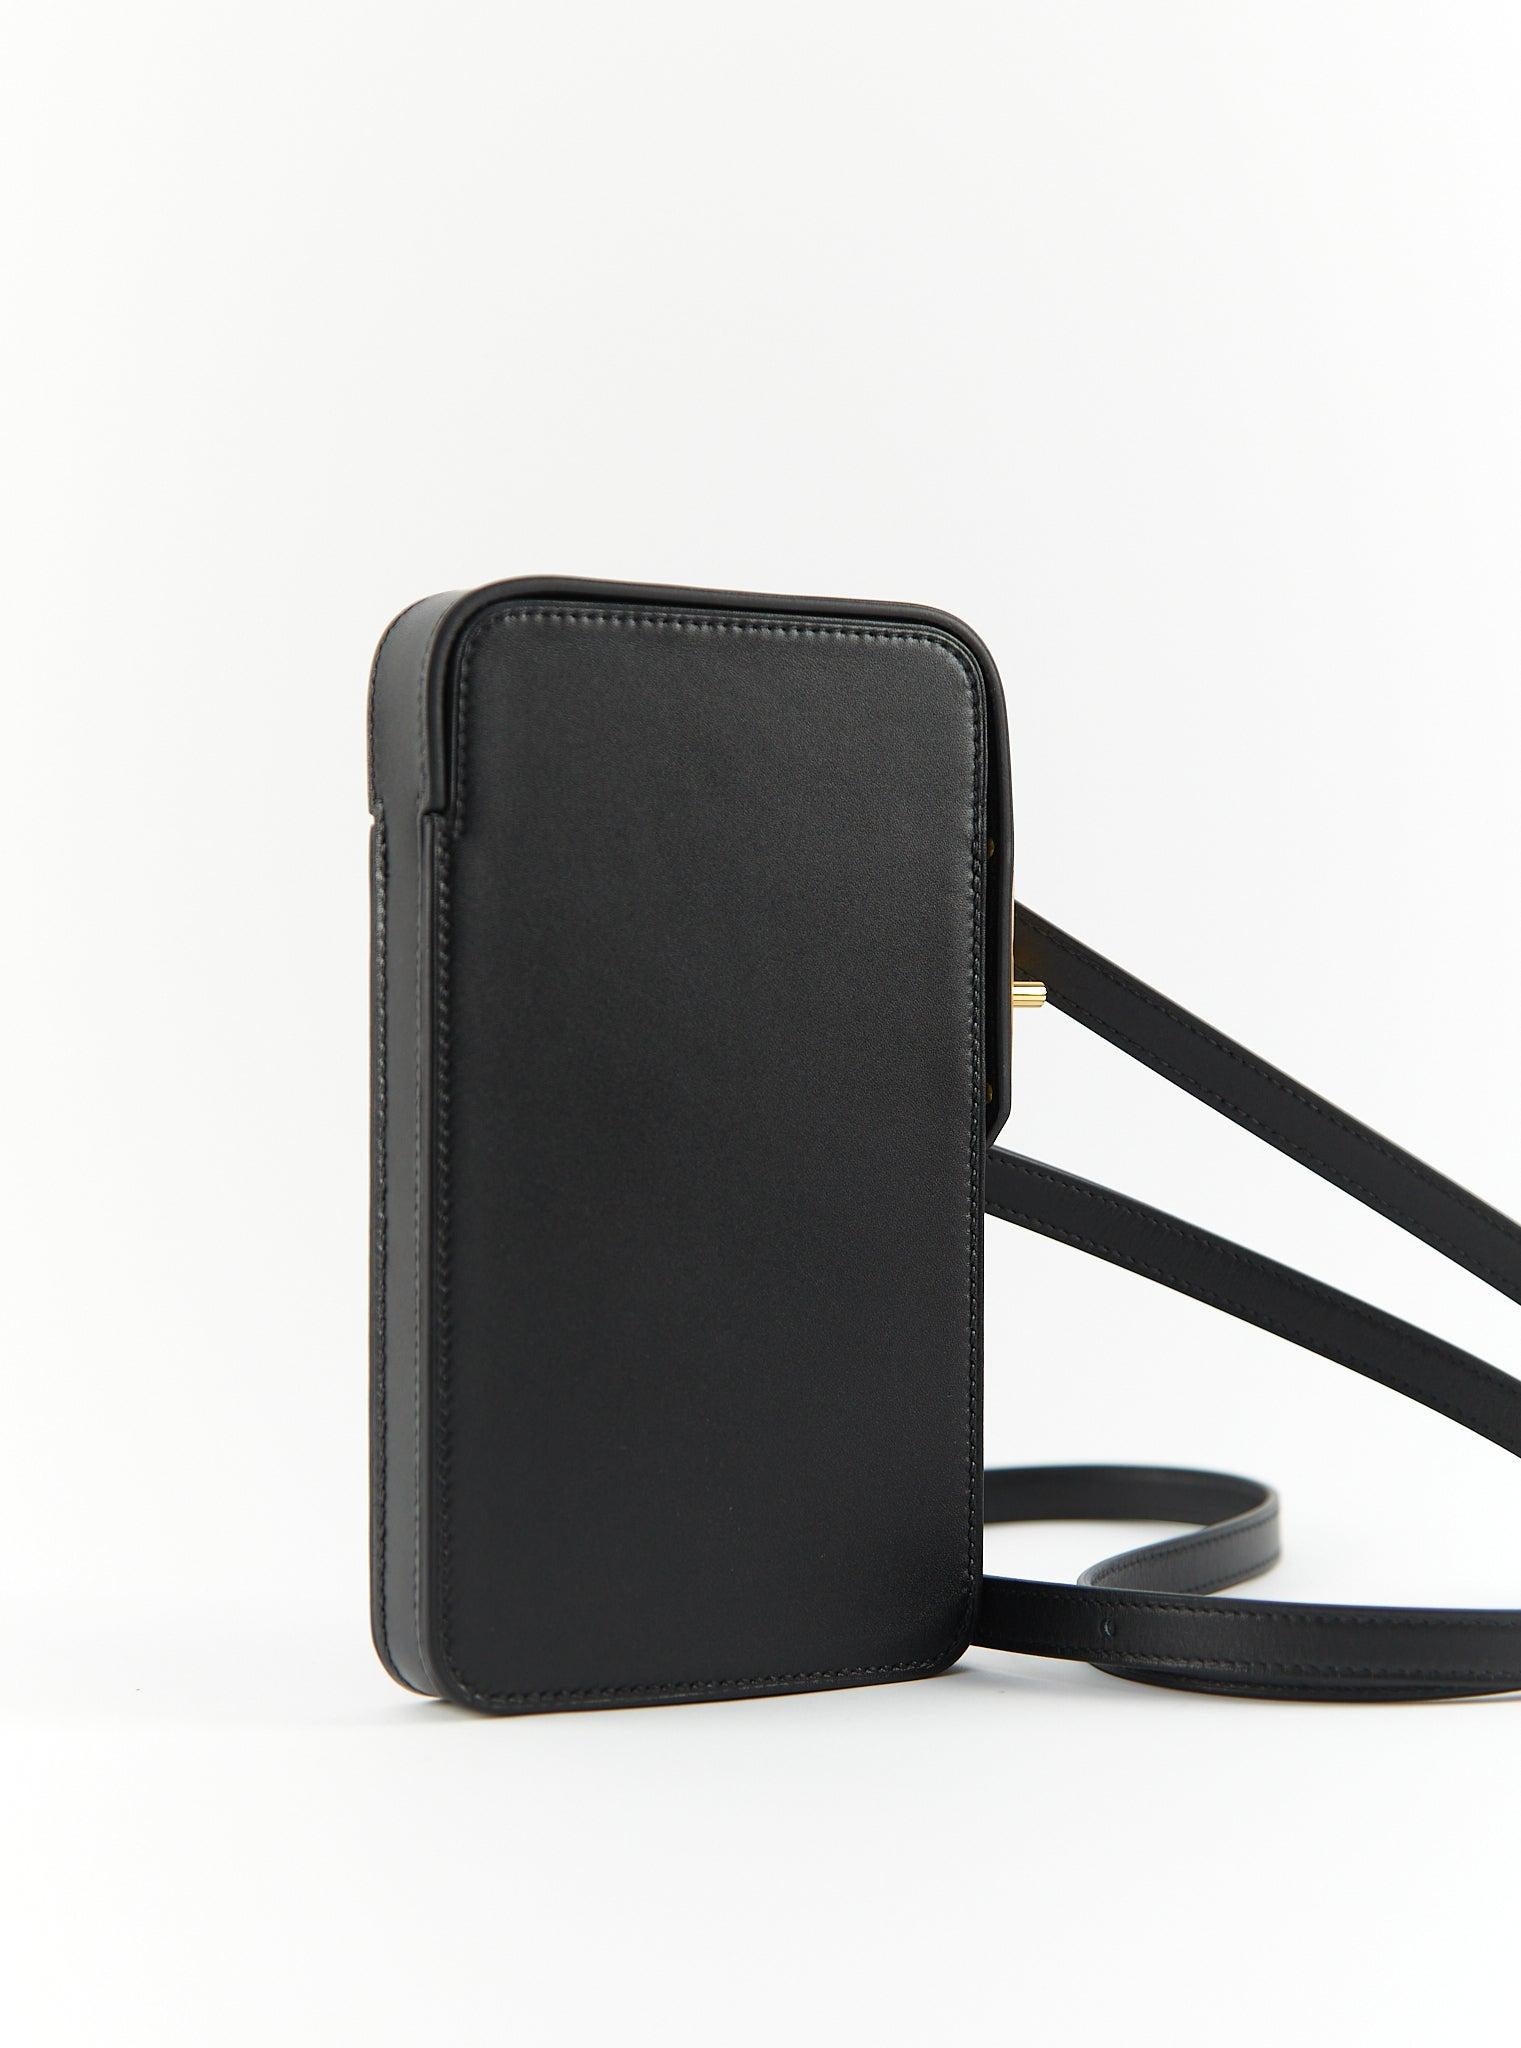 HERMÈS HERMESWAY PHONE CASE BLACK Tadelakt Leather with Gold Hardware In Excellent Condition For Sale In London, GB